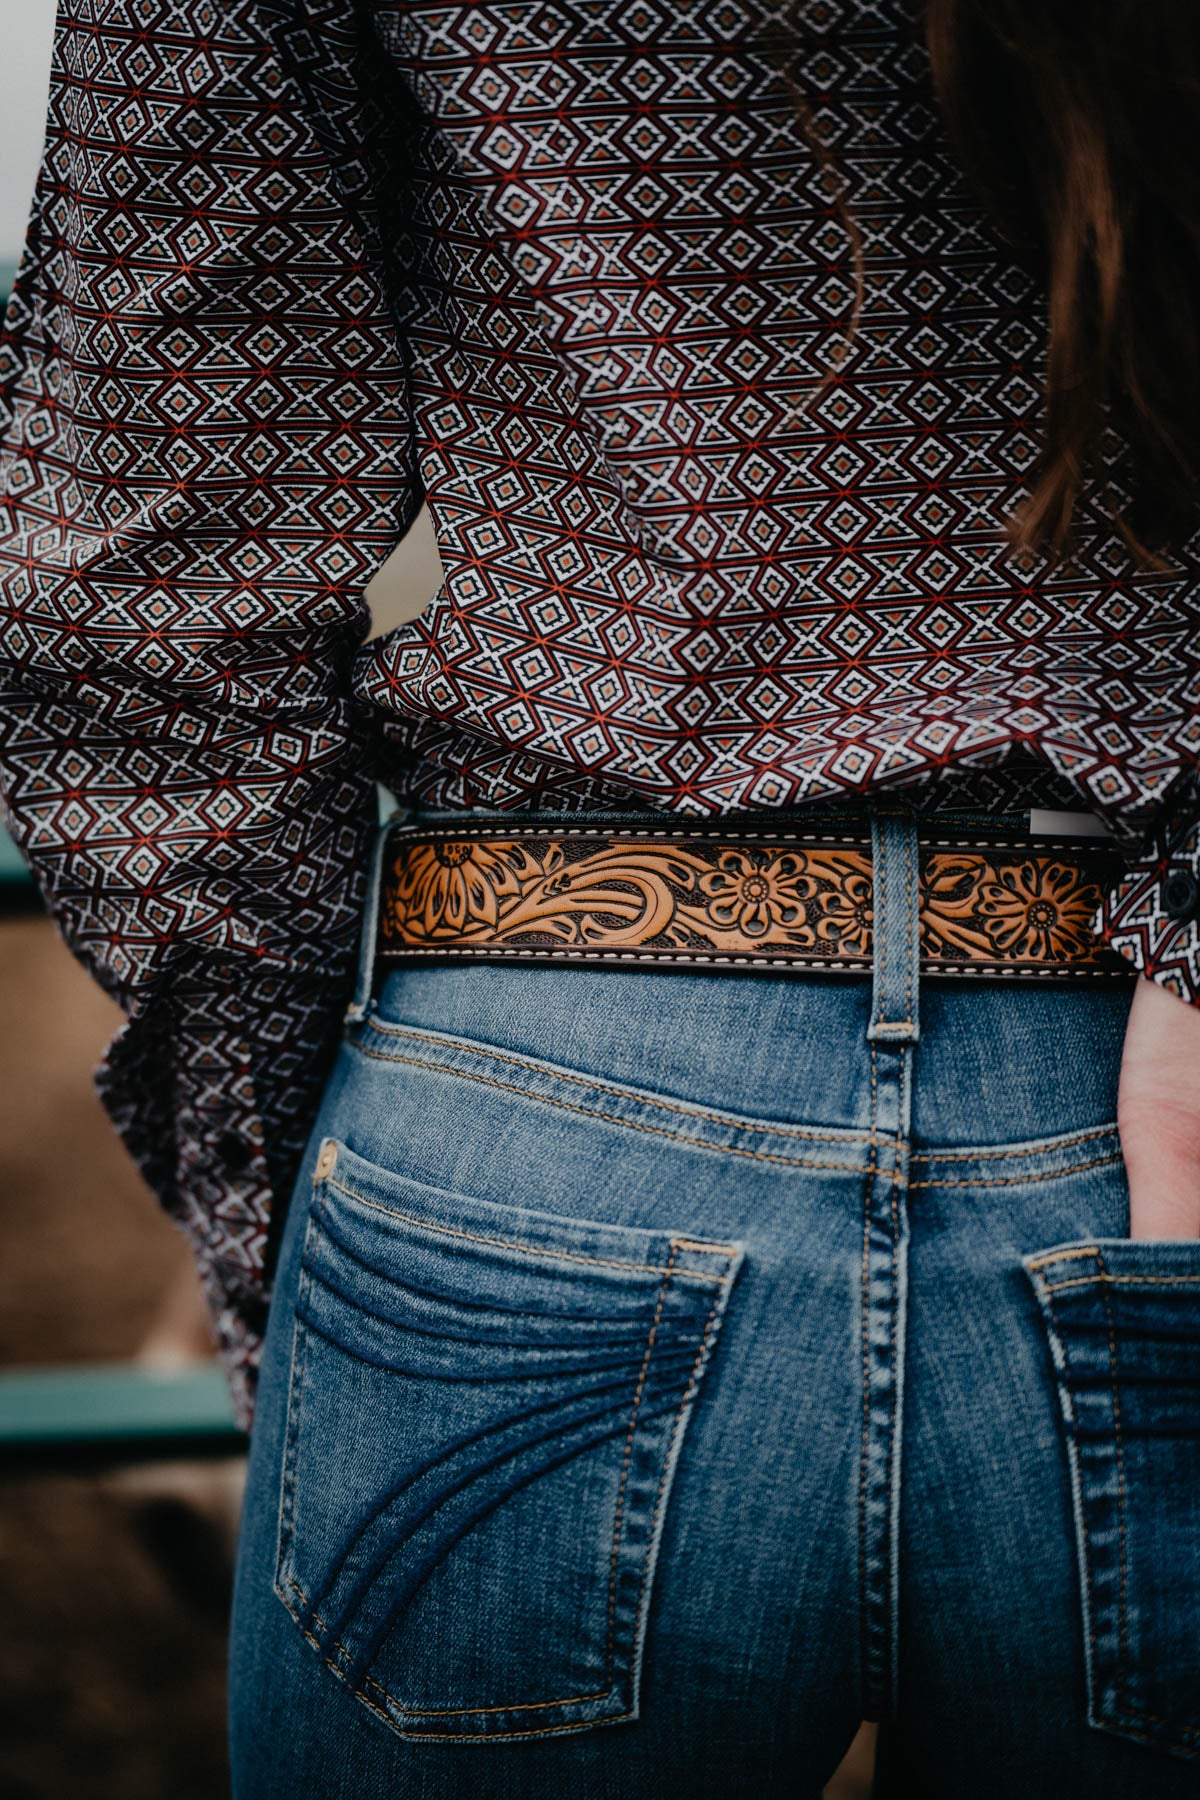 Floral Tooled Leather Belt with Silver Buckle